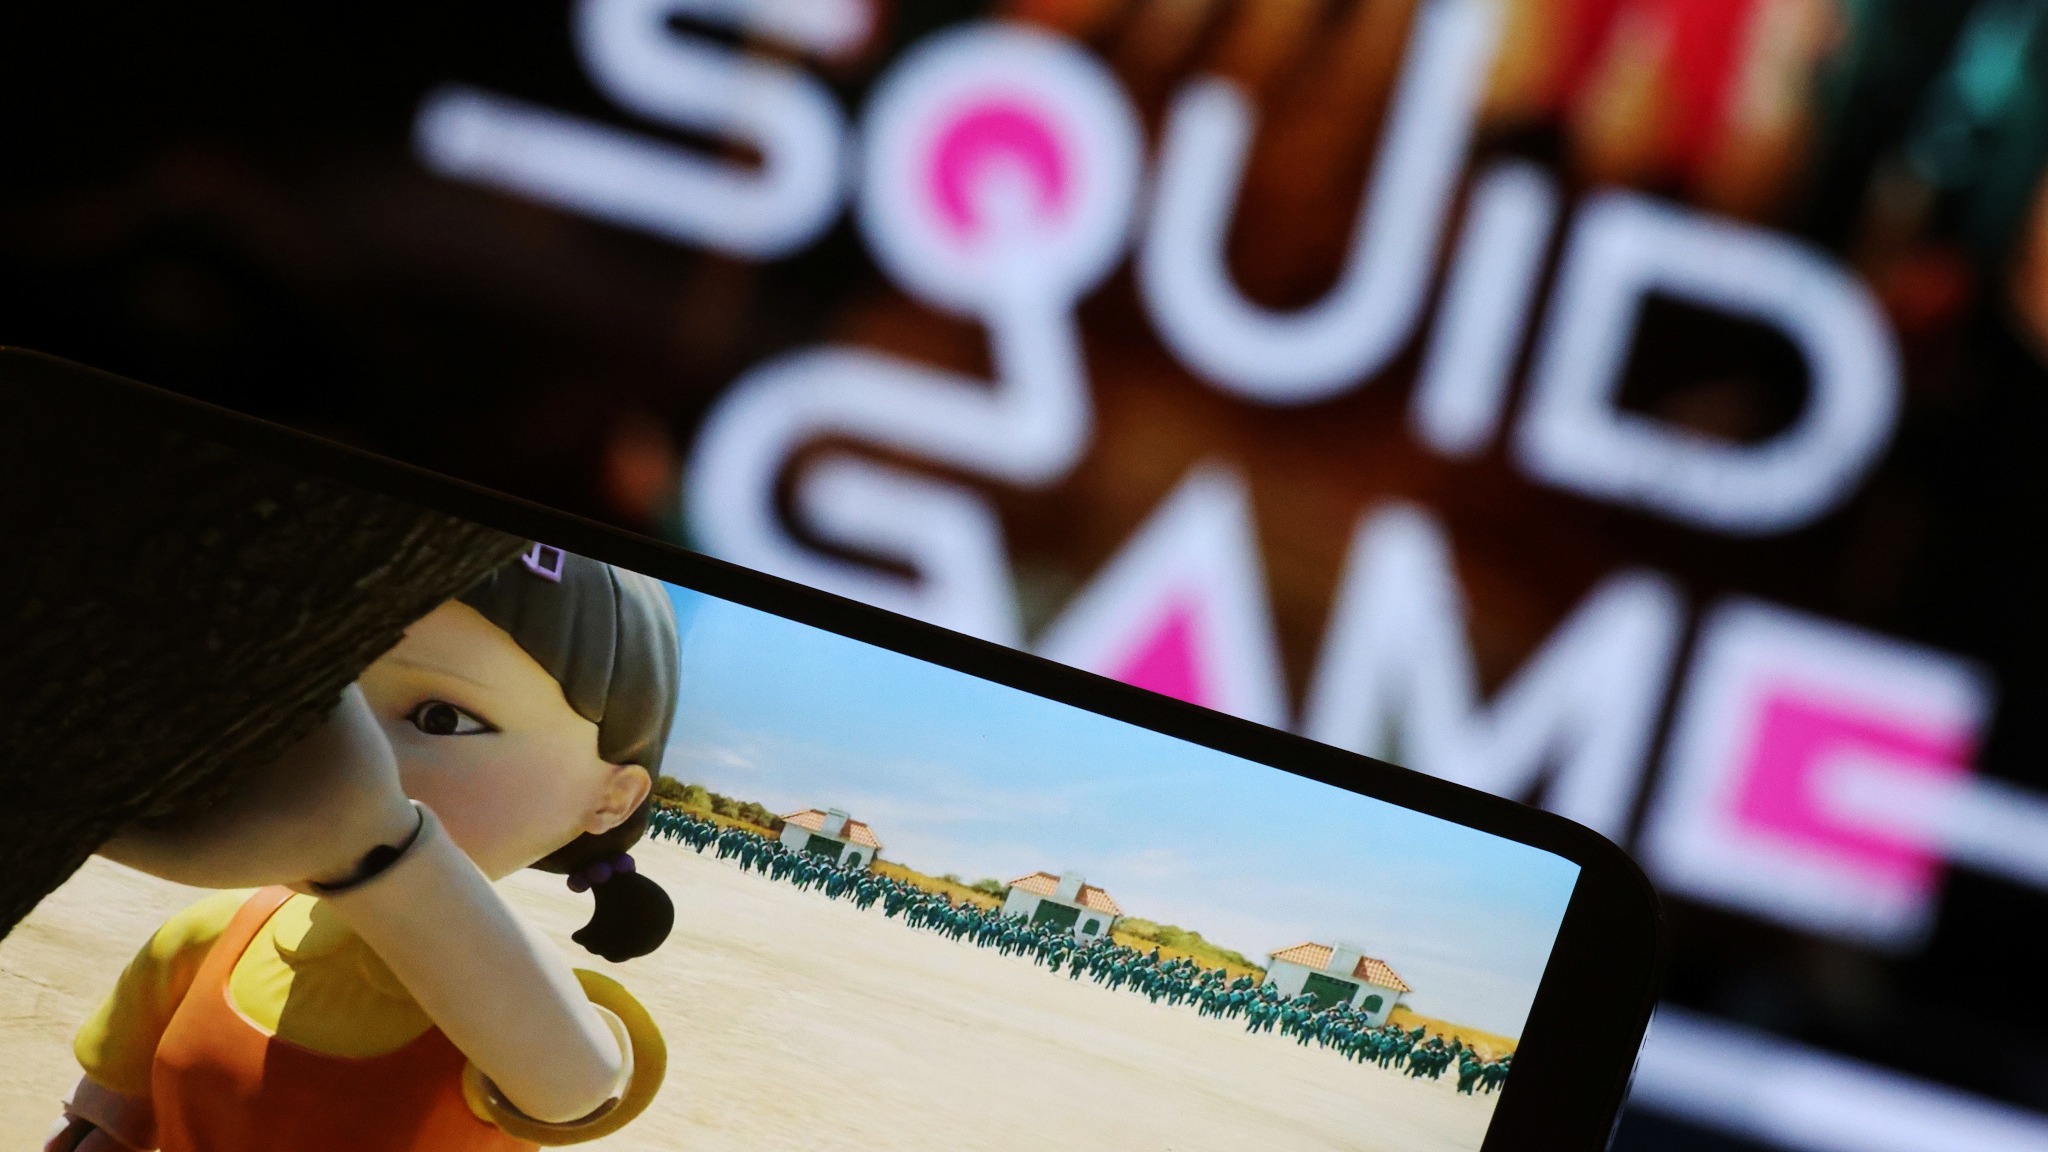 Squid Game' hit lands Netflix in Seoul court over traffic surge